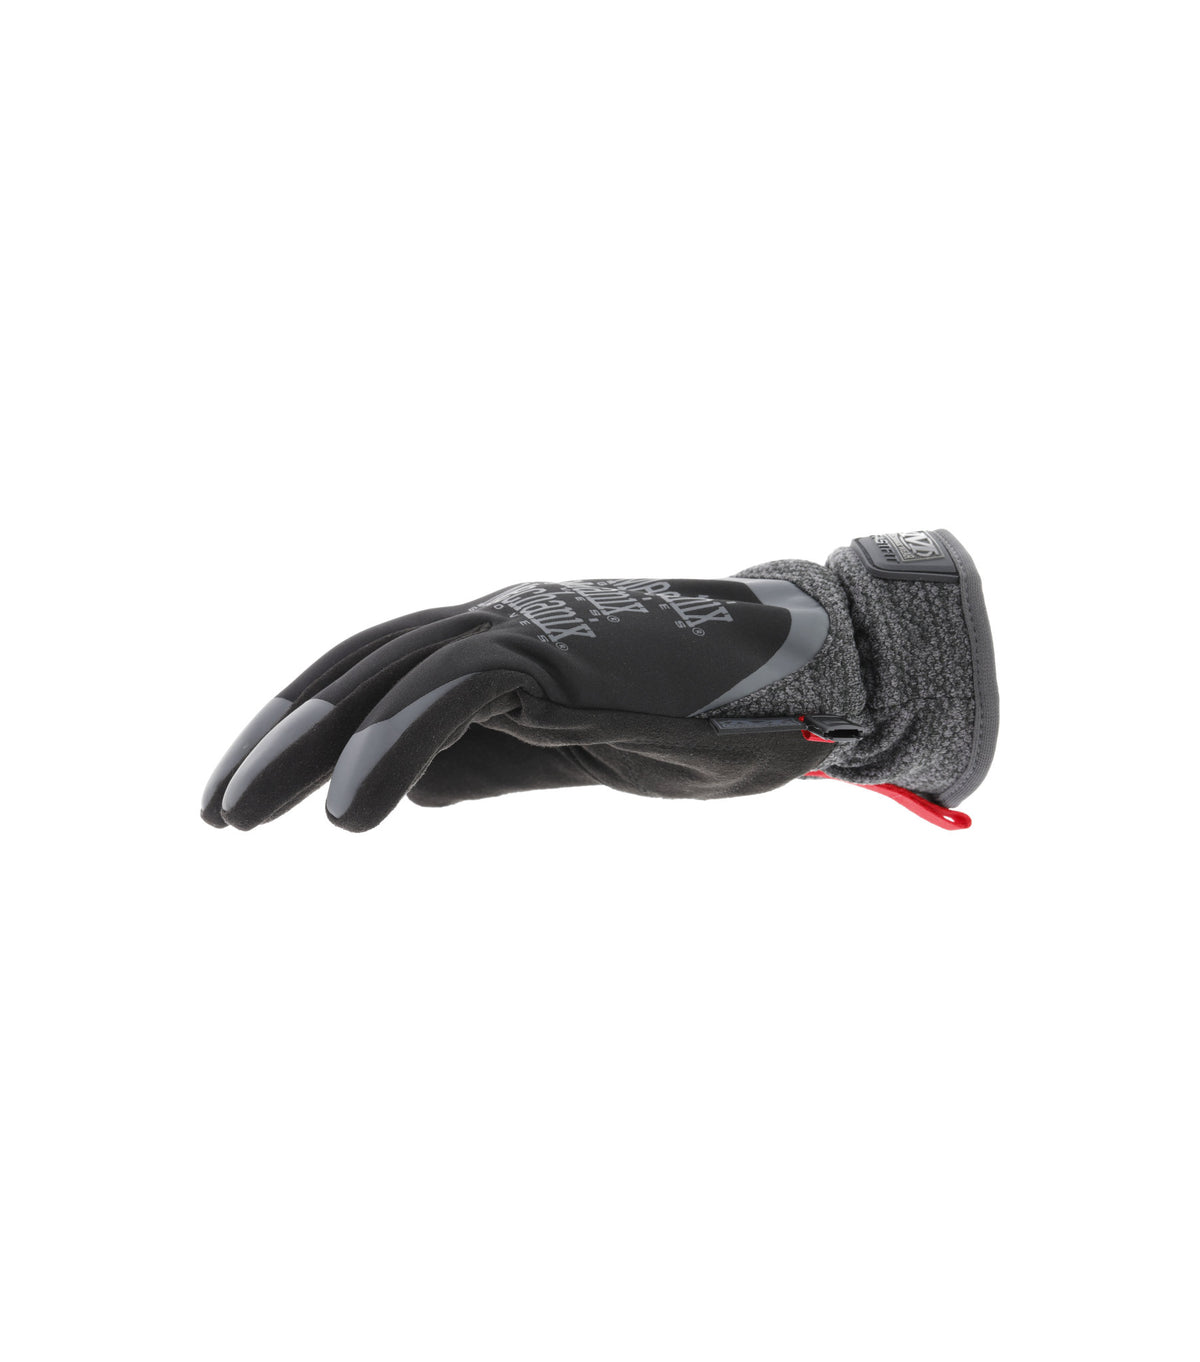 Mechanix Wear ColdWork FastFit gloves angled view, highlighting the snug cuff and dexterity for all-weather work.